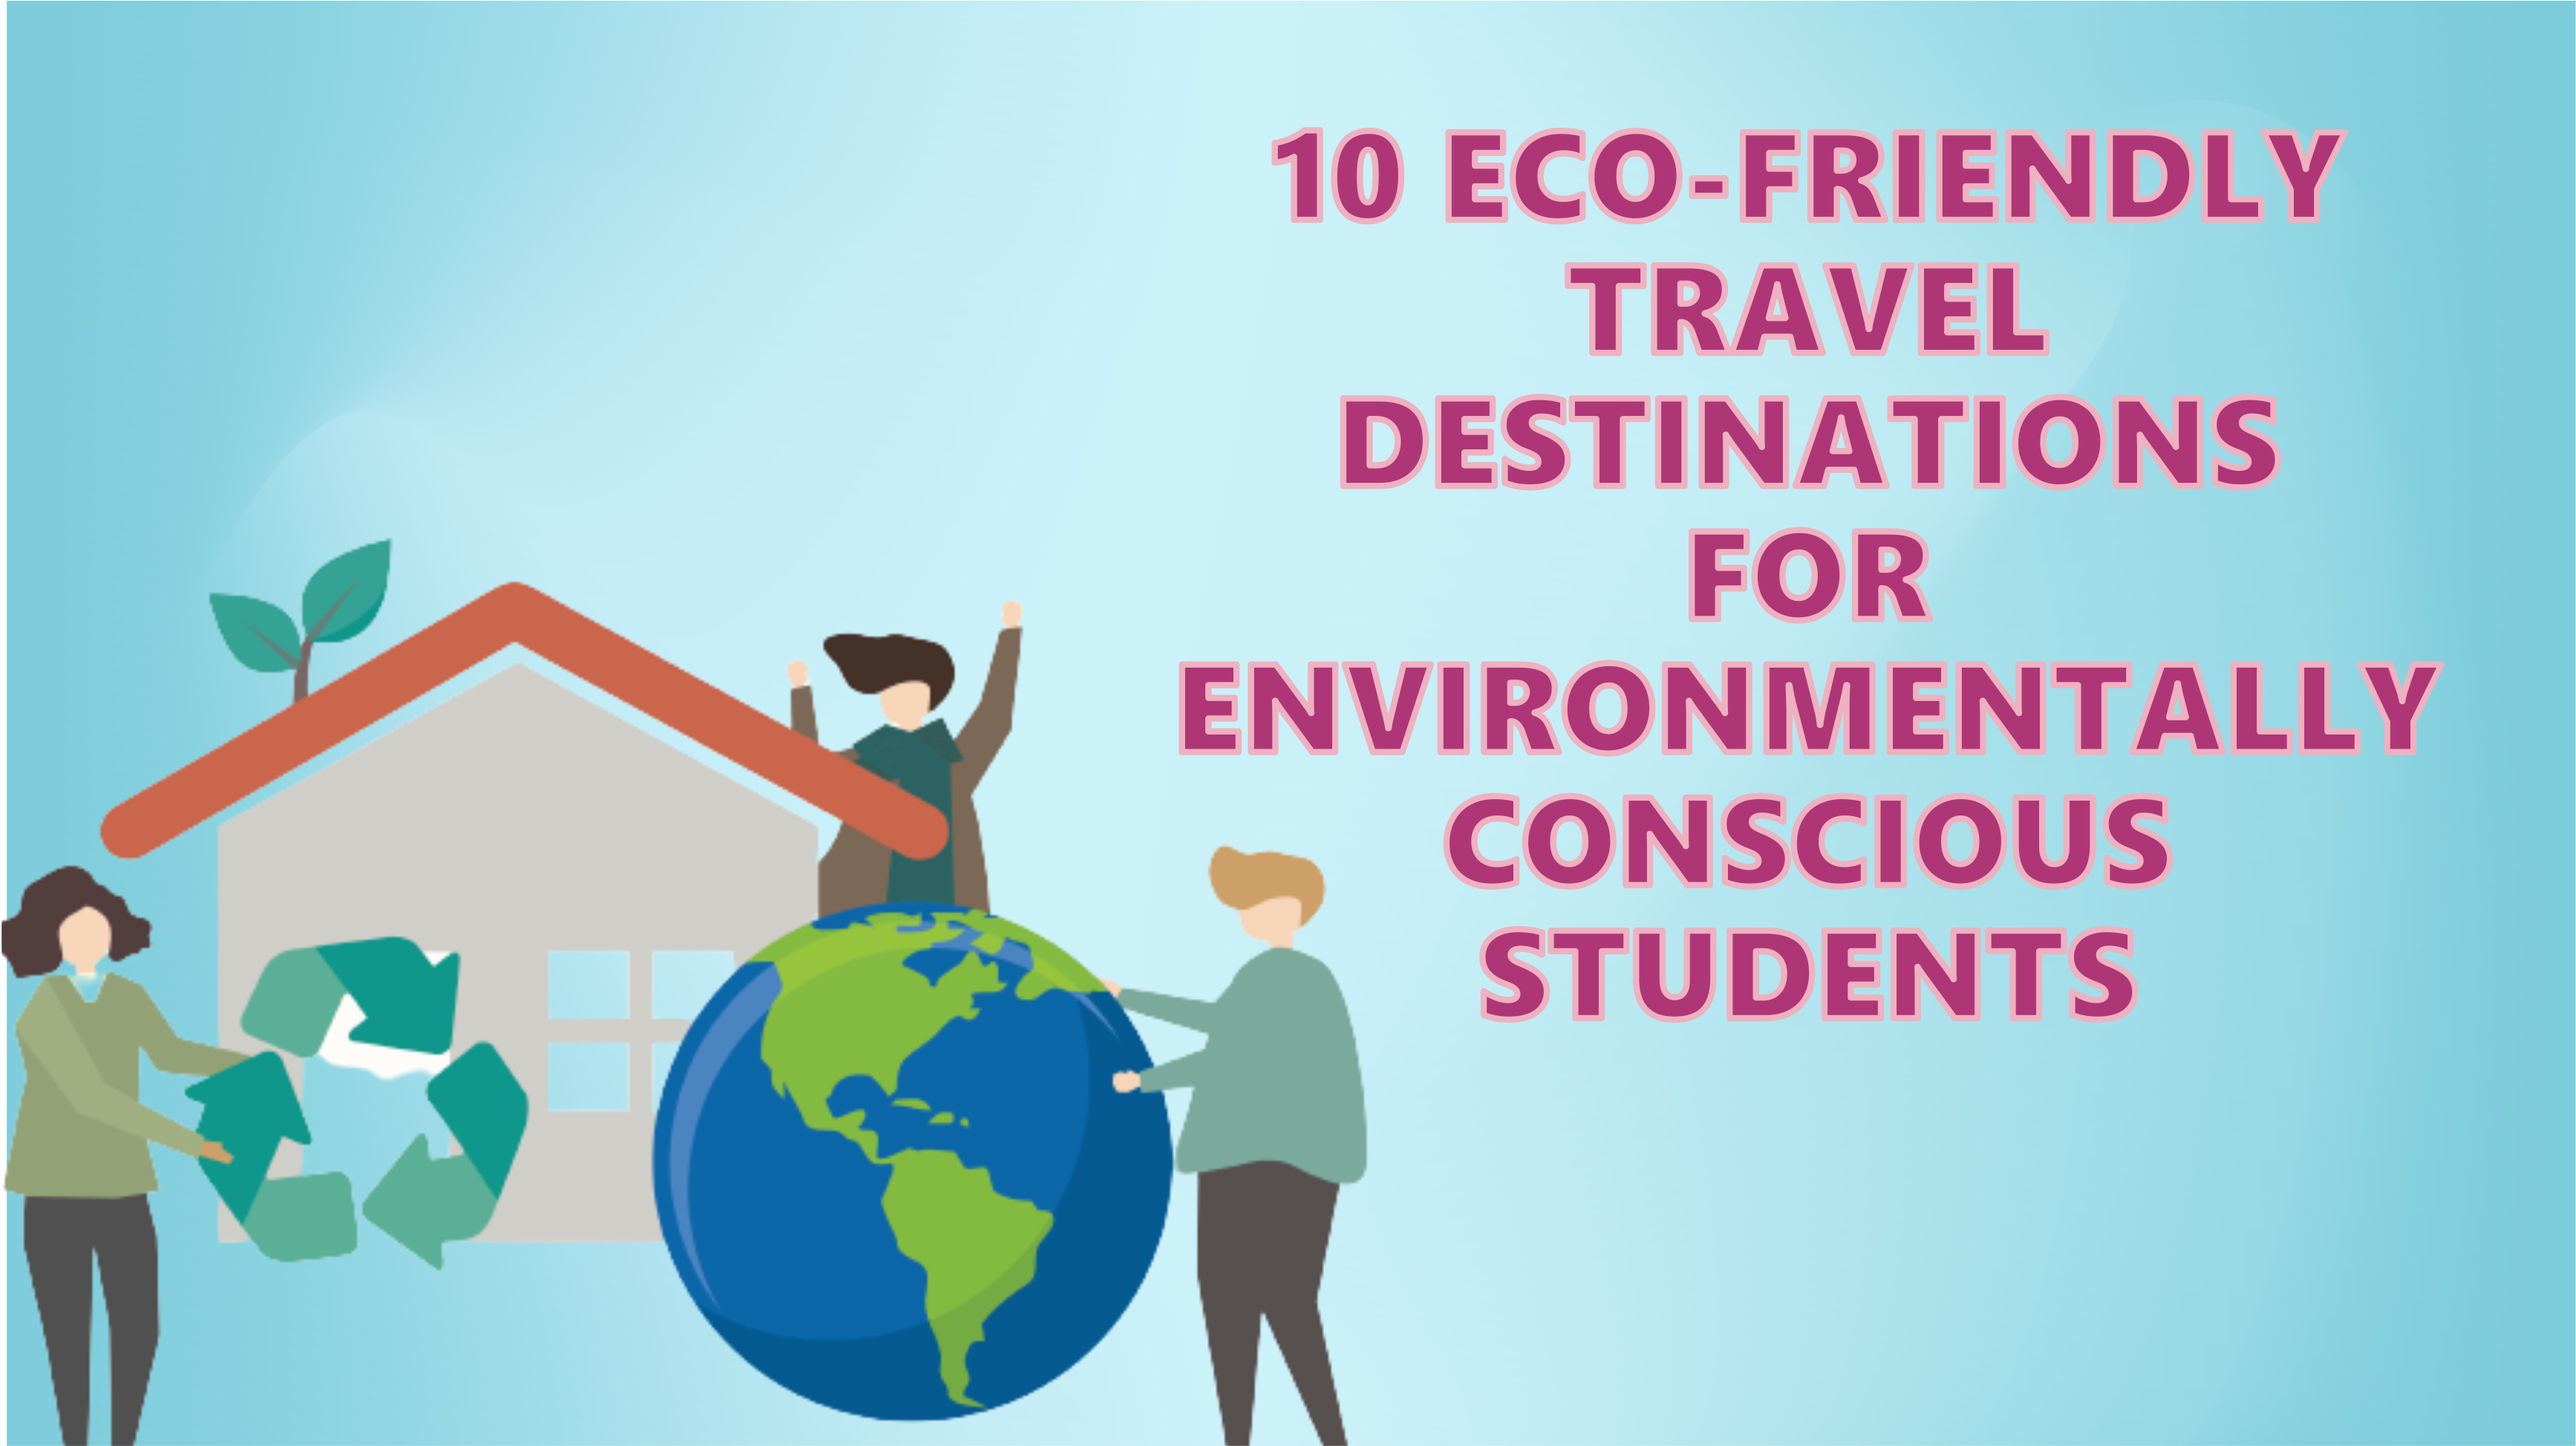 10 eco-friendly travel destinations for environmentally-conscious students